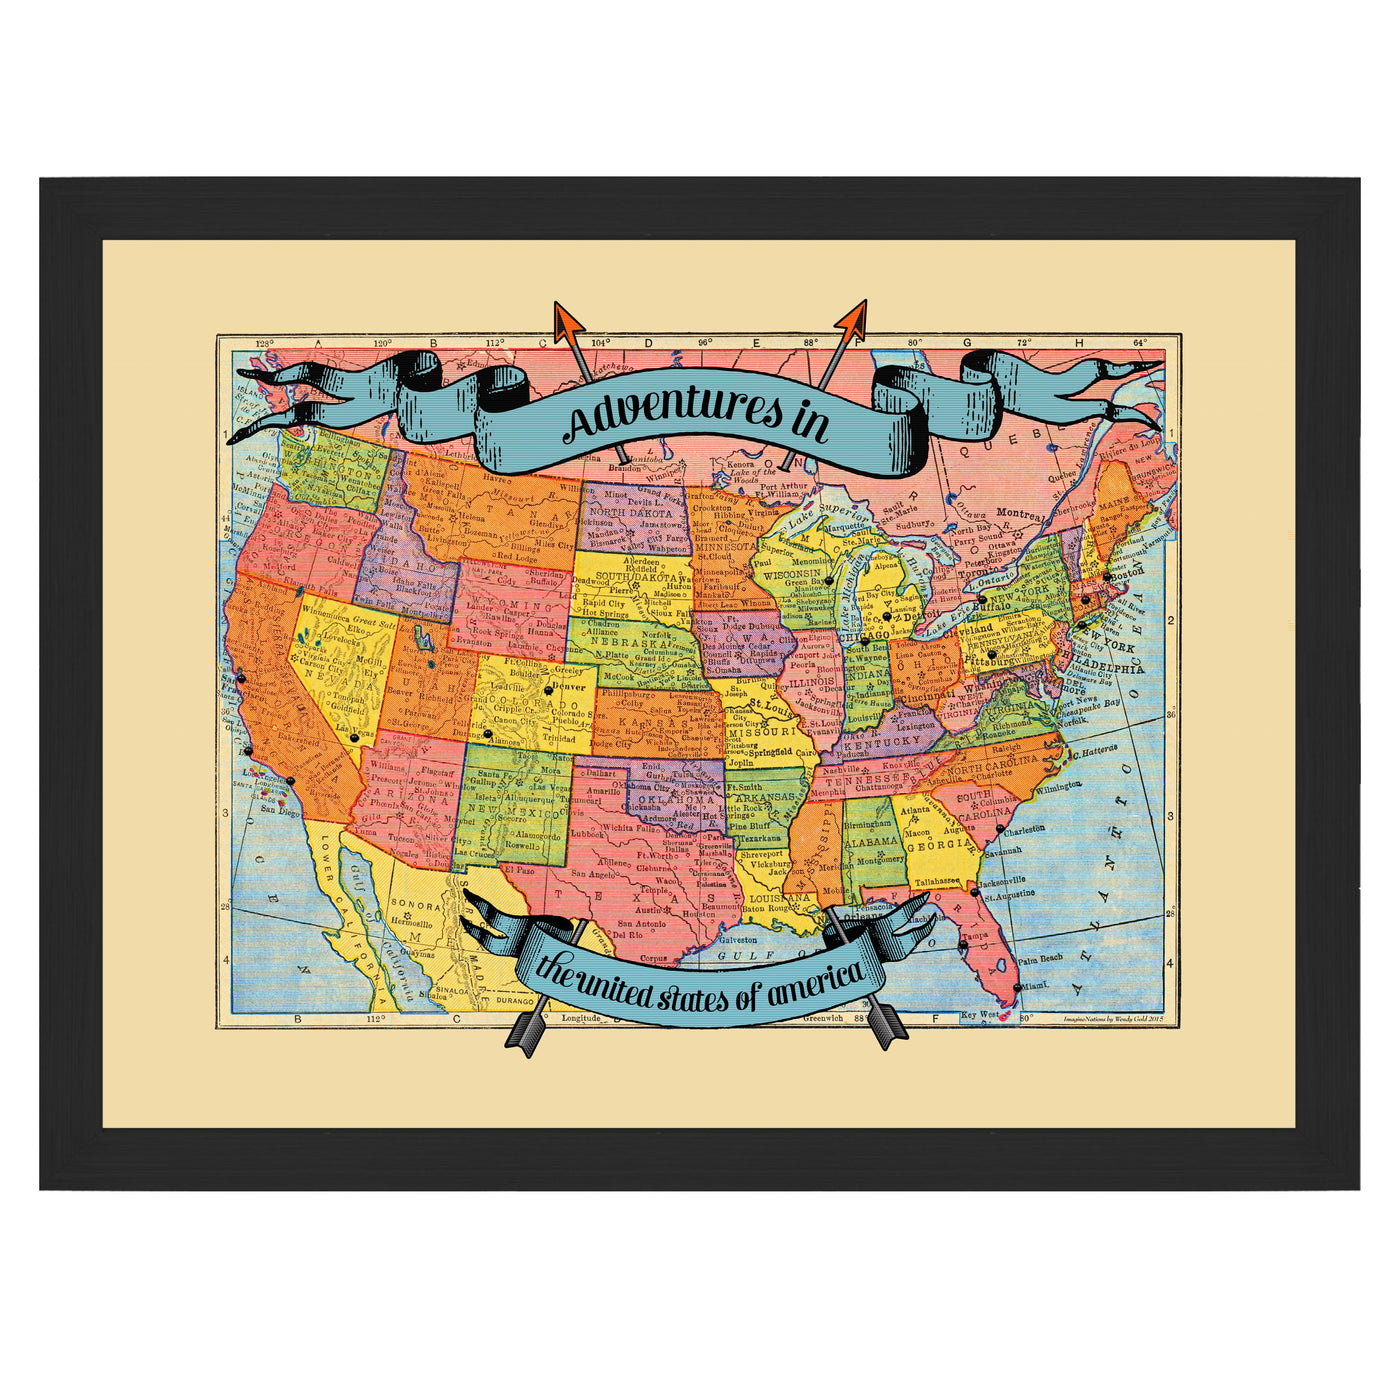 USA Adventures Travel Map with Pins un-customized